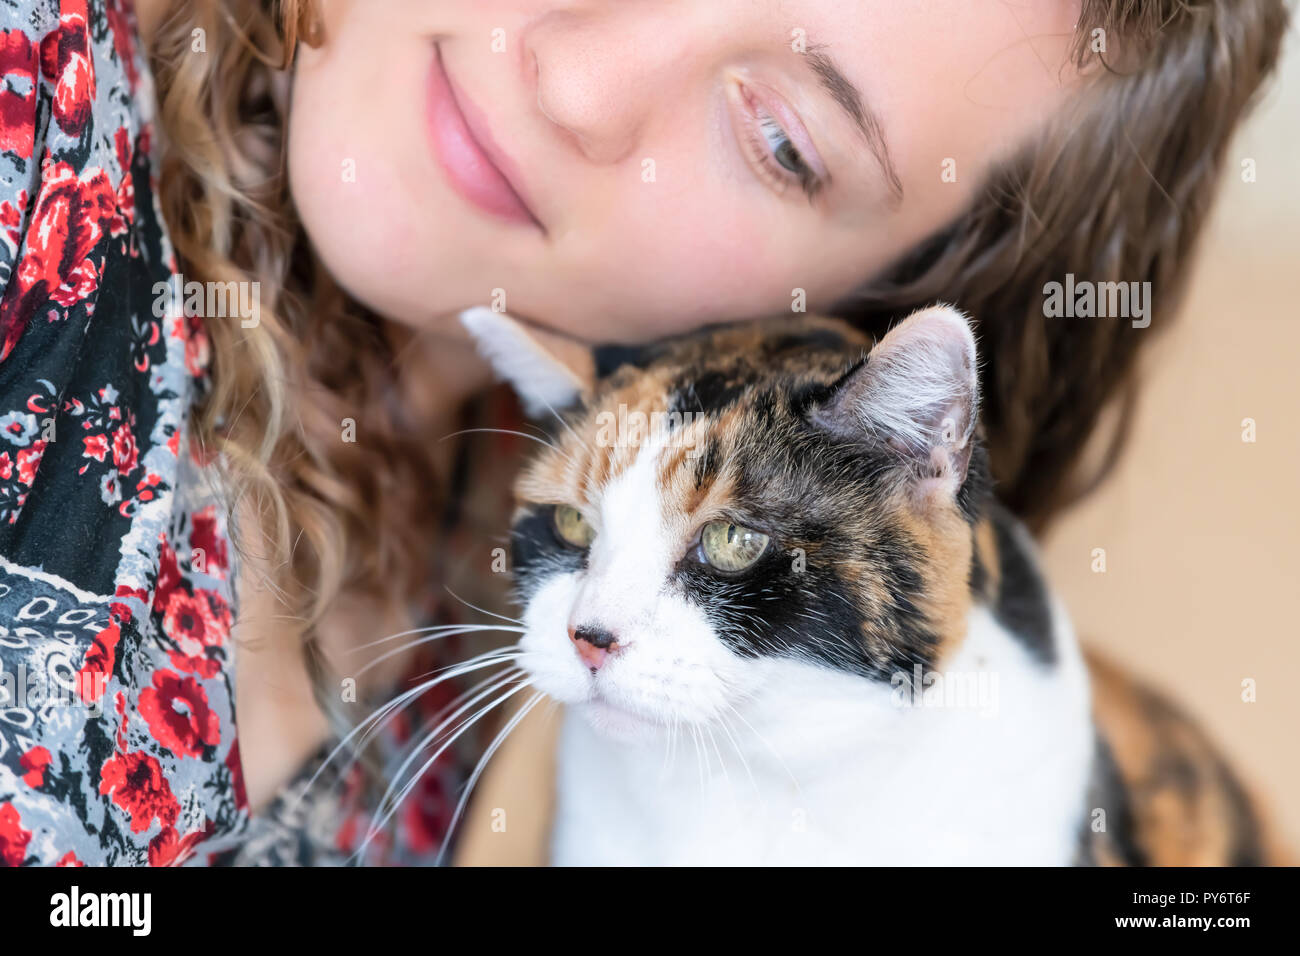 Young woman bonding with calico cat bumping rubbing bunting heads, friends friendship companion pet happy affection bonding face expression, cute ador Stock Photo